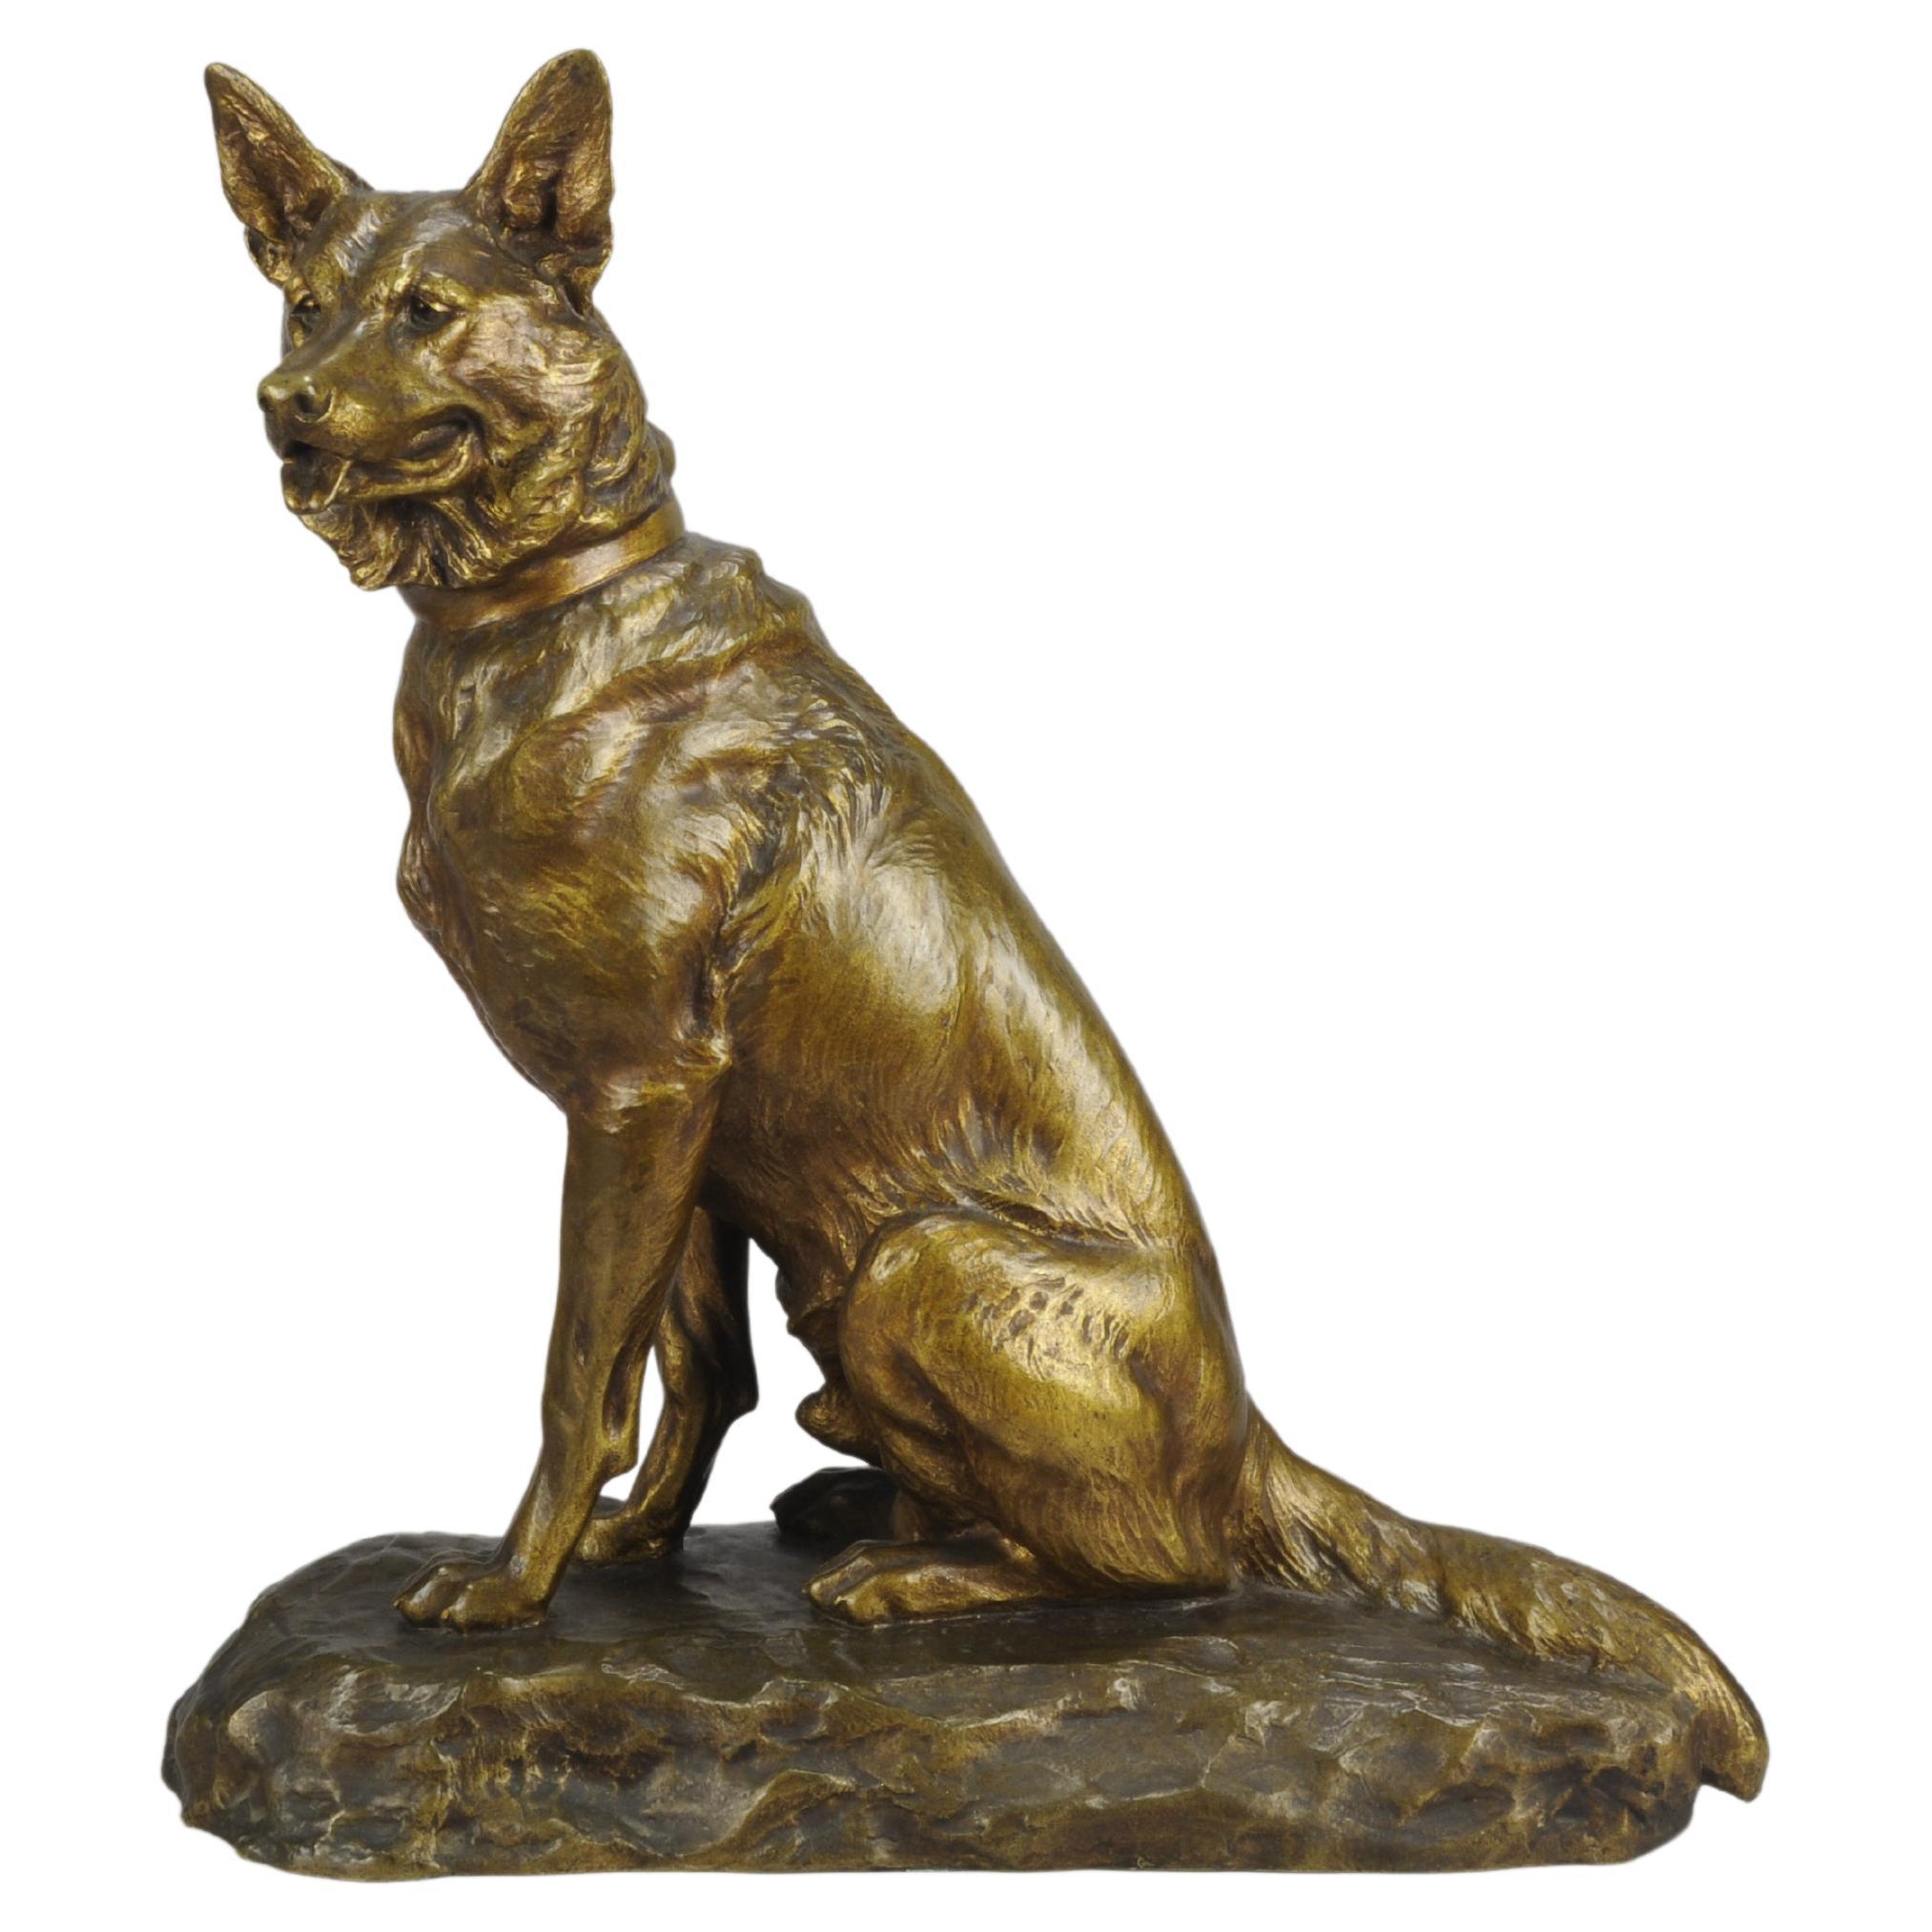 Early-20th Century Animalier Bronze Entitled "Seated Alsatian" by Louis Riché For Sale